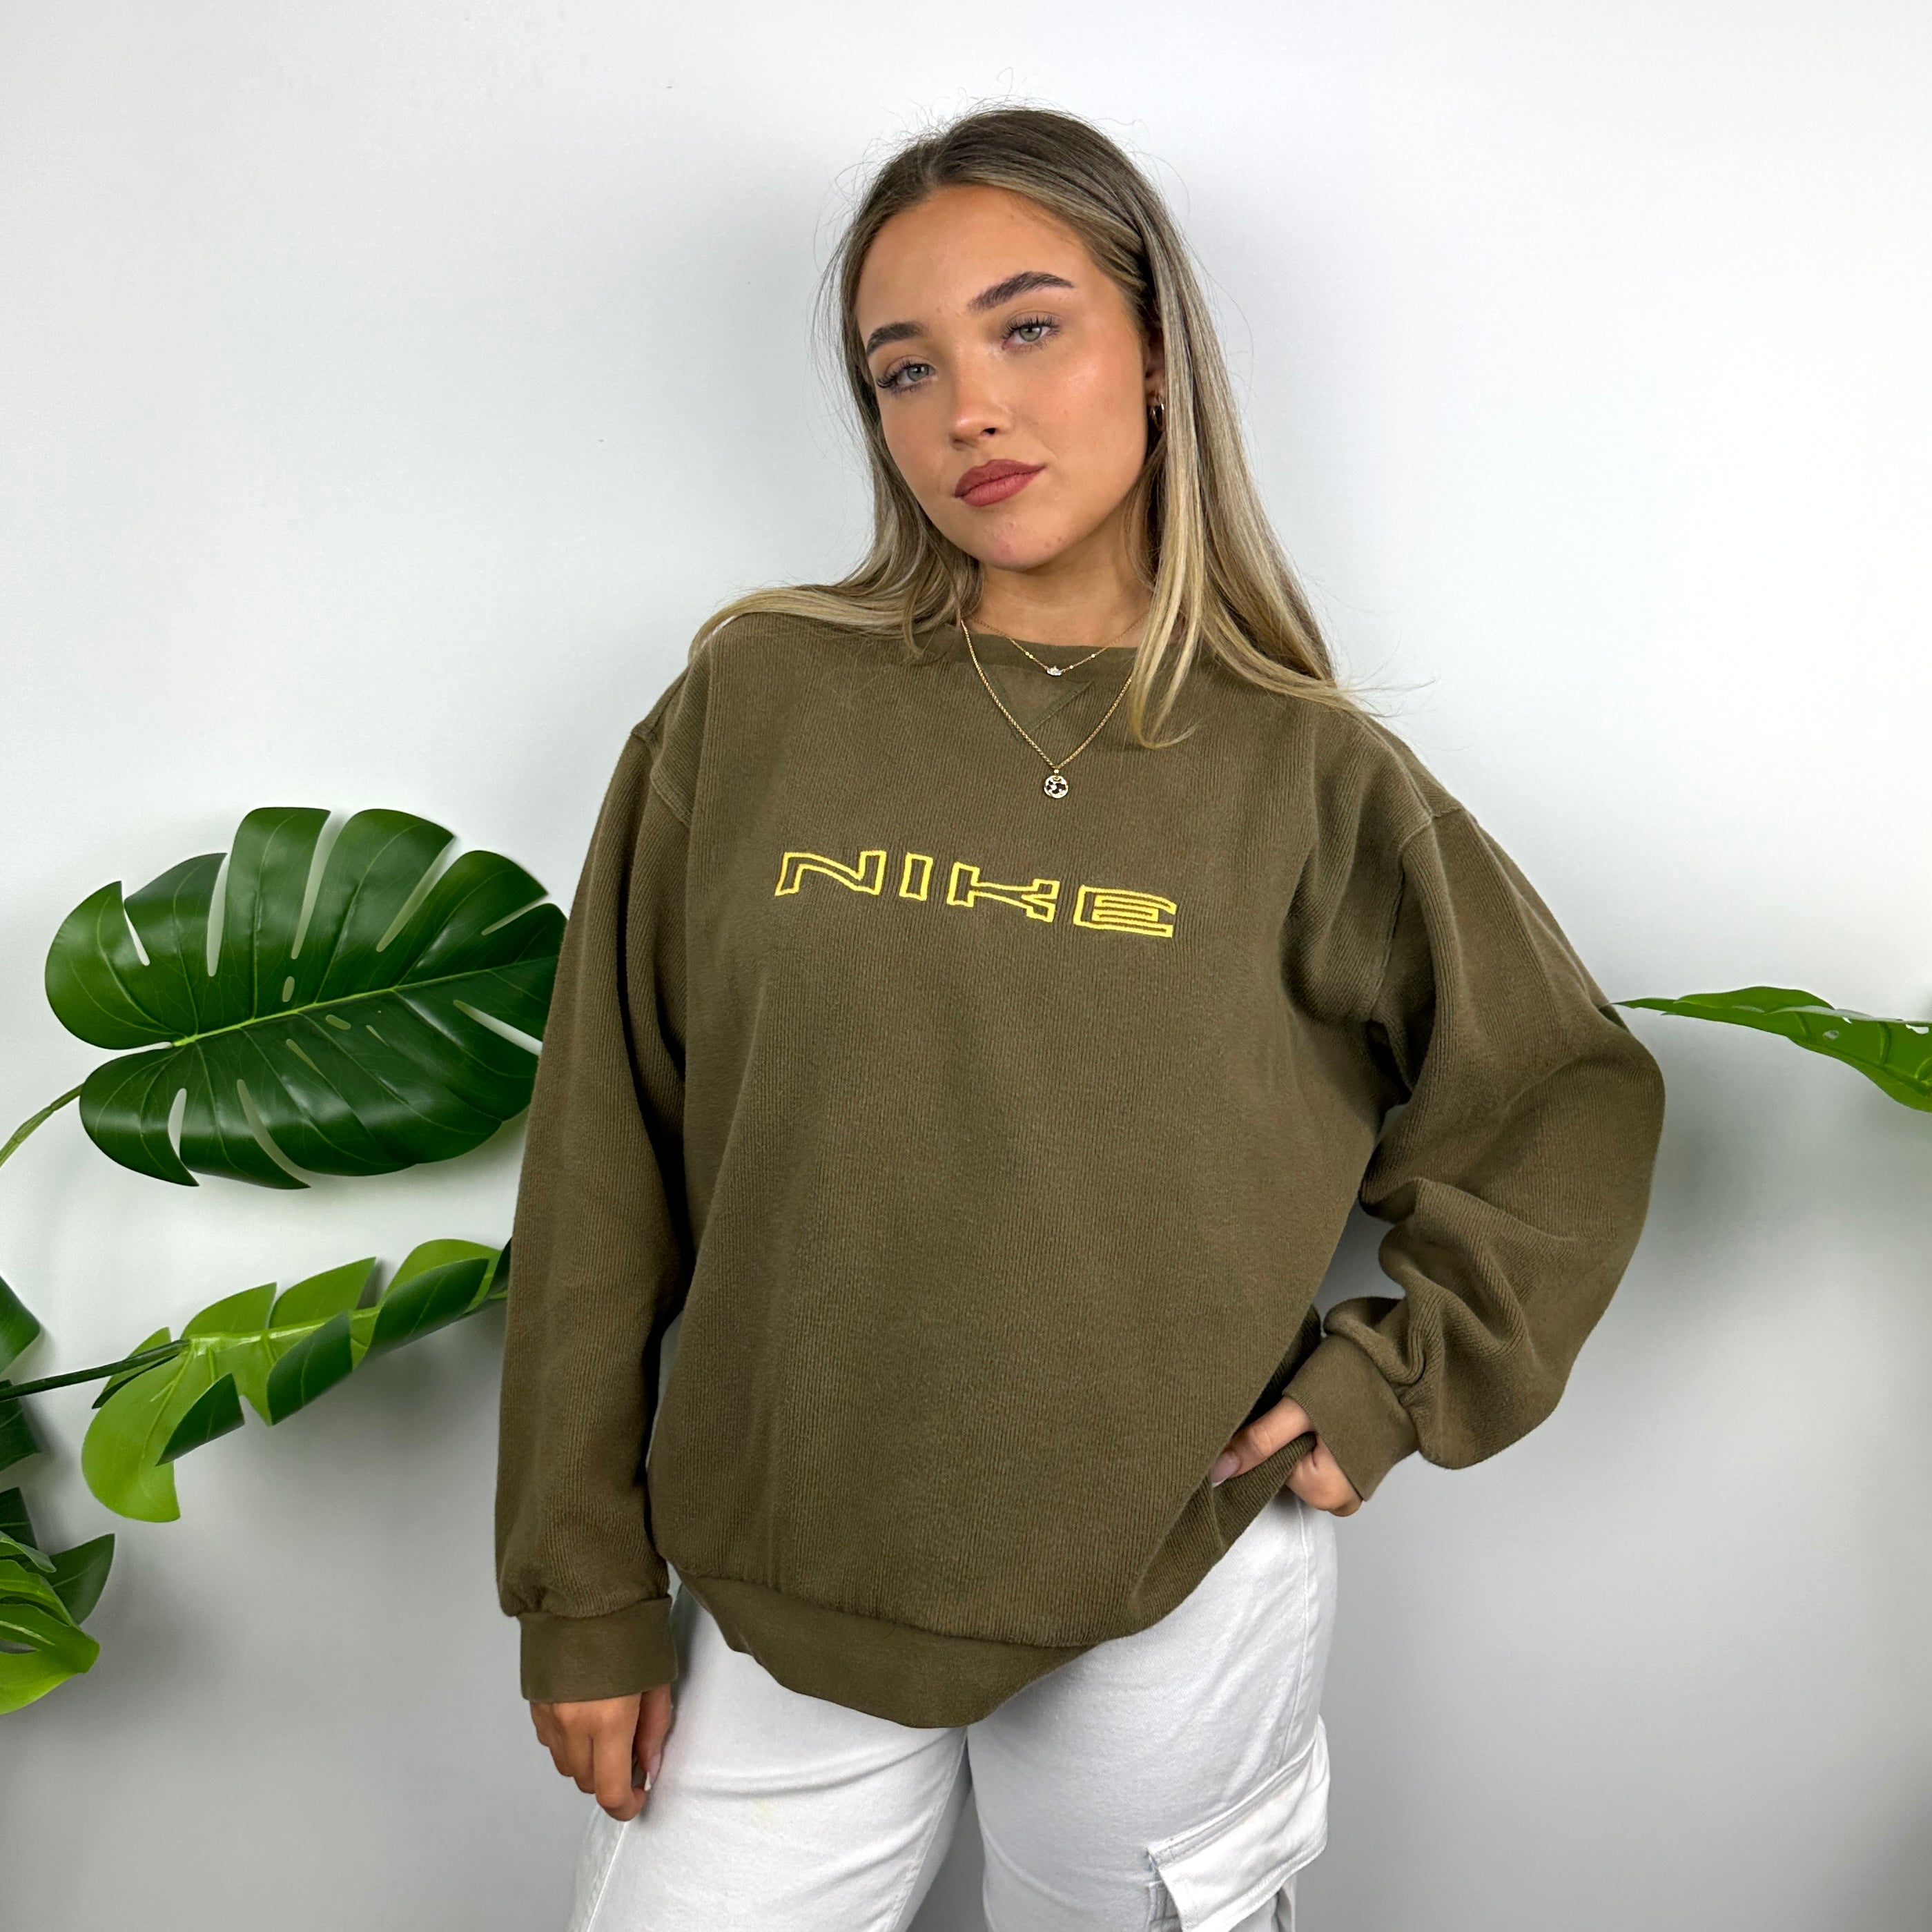 Nike Khaki Embroidered Spell Out Sweatshirt (L)